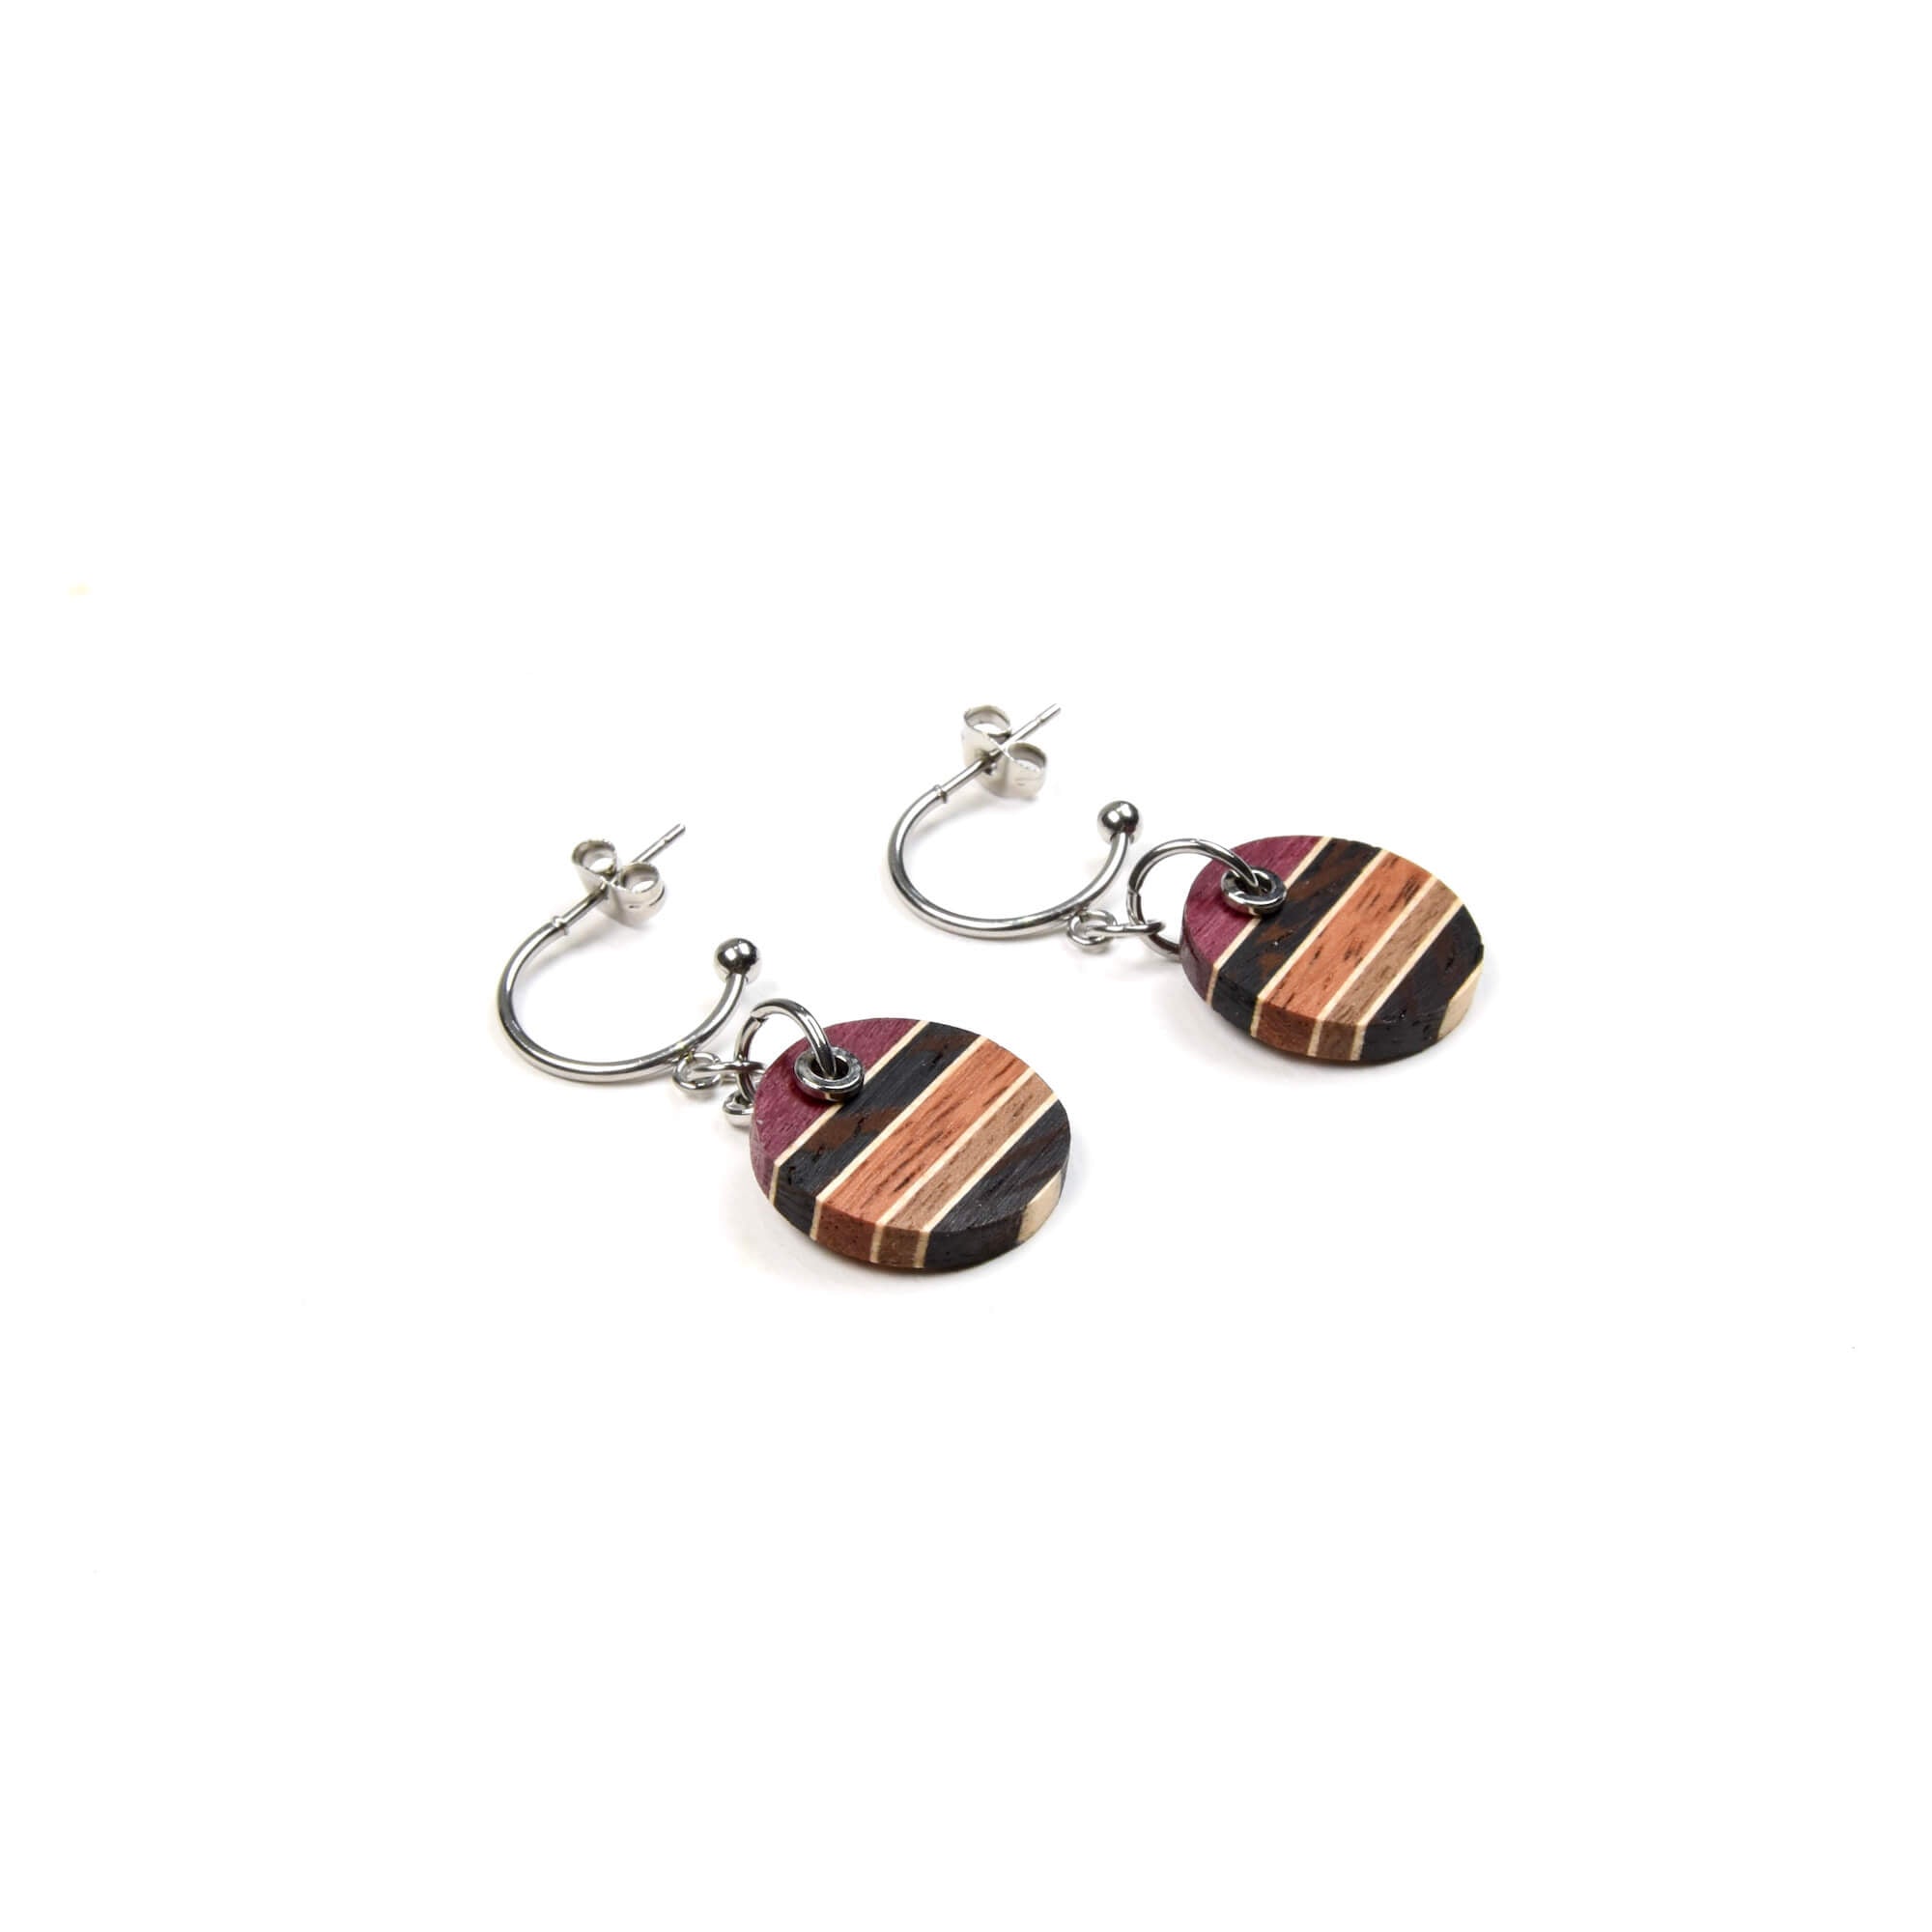 Round wooden earrings | Tamore